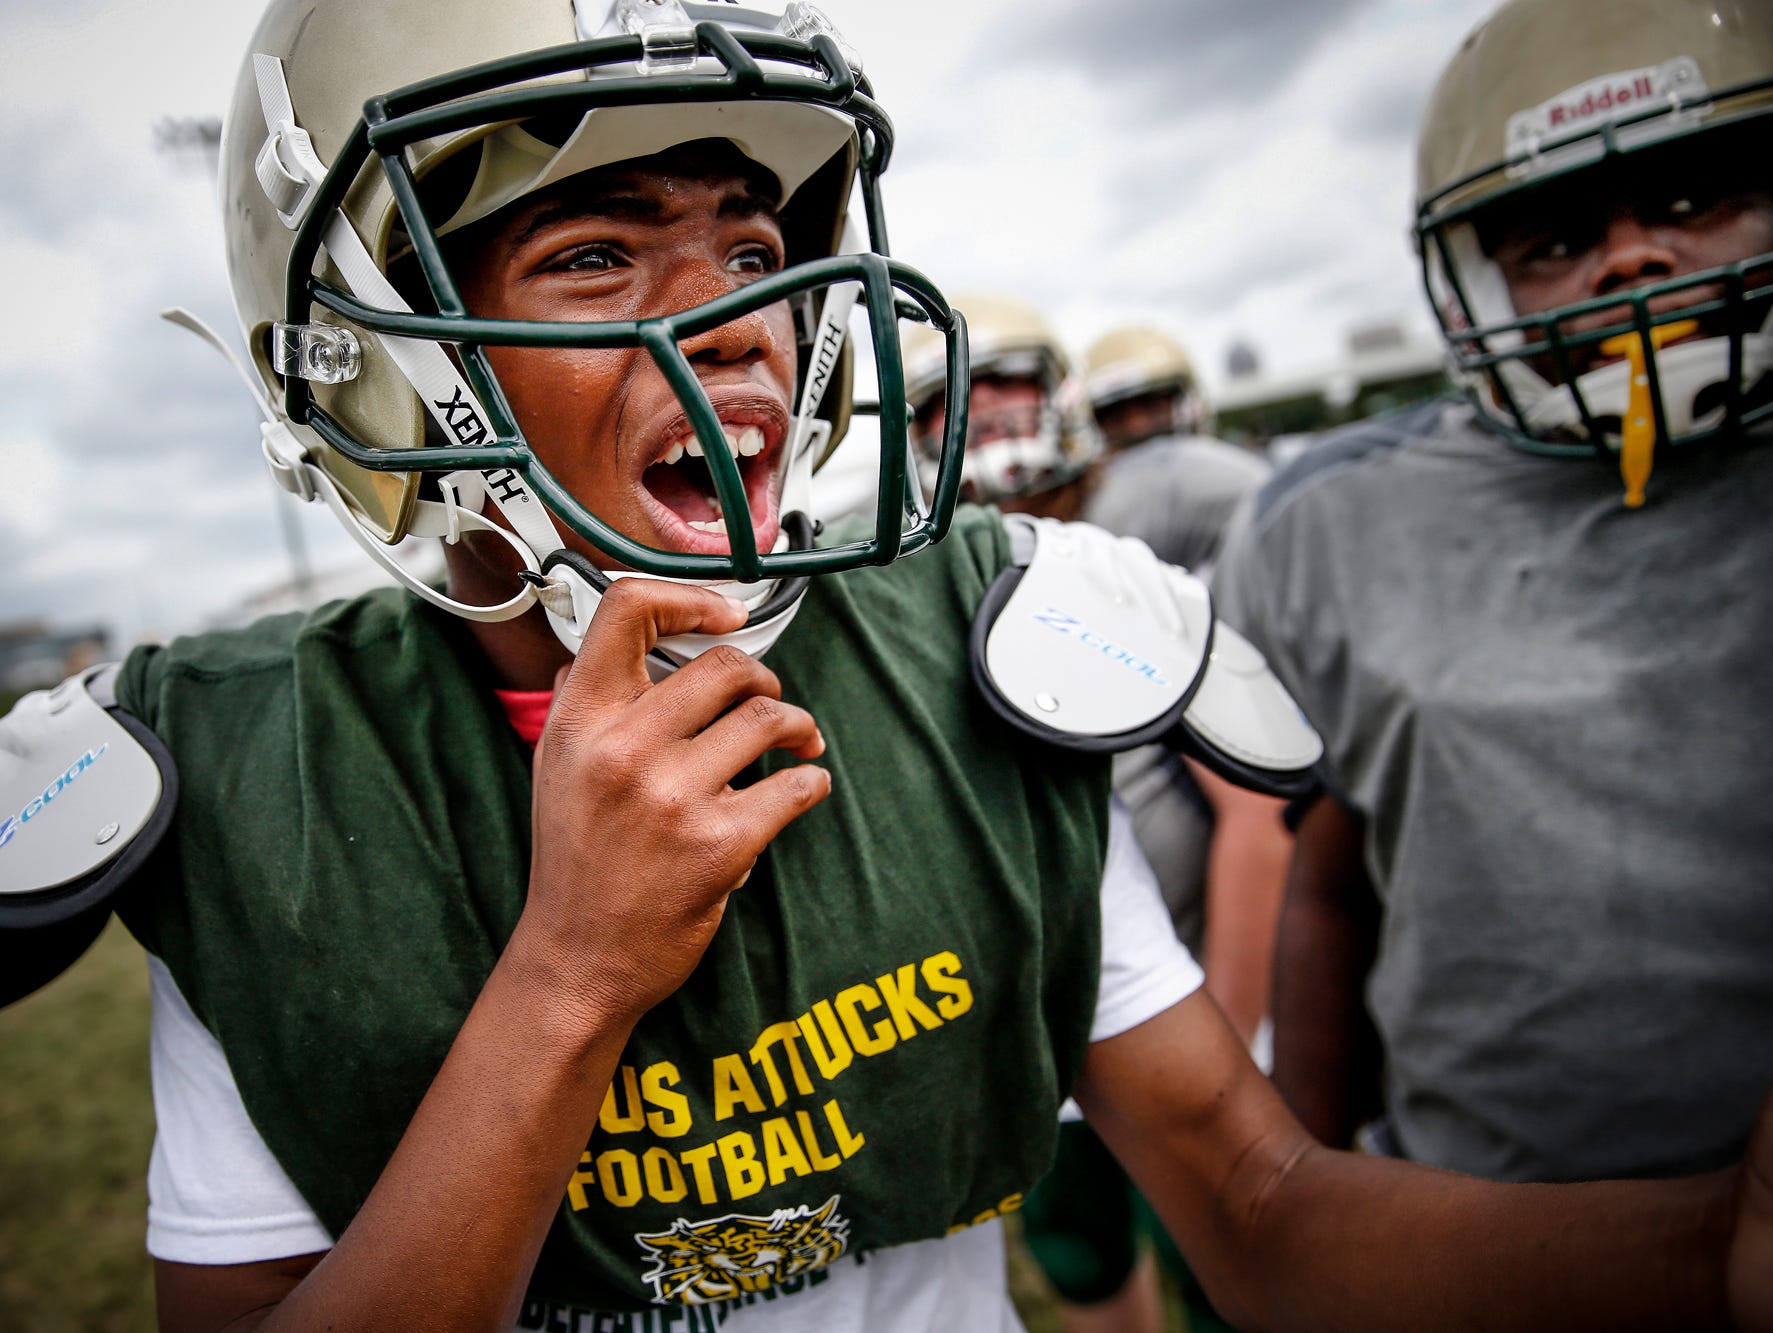 Crispus Attucks freshman quarterback Quanzell Jones gets after his team in the huddle during practice at Alonzo Watford Athletic Field on Aug. 17, 2016.